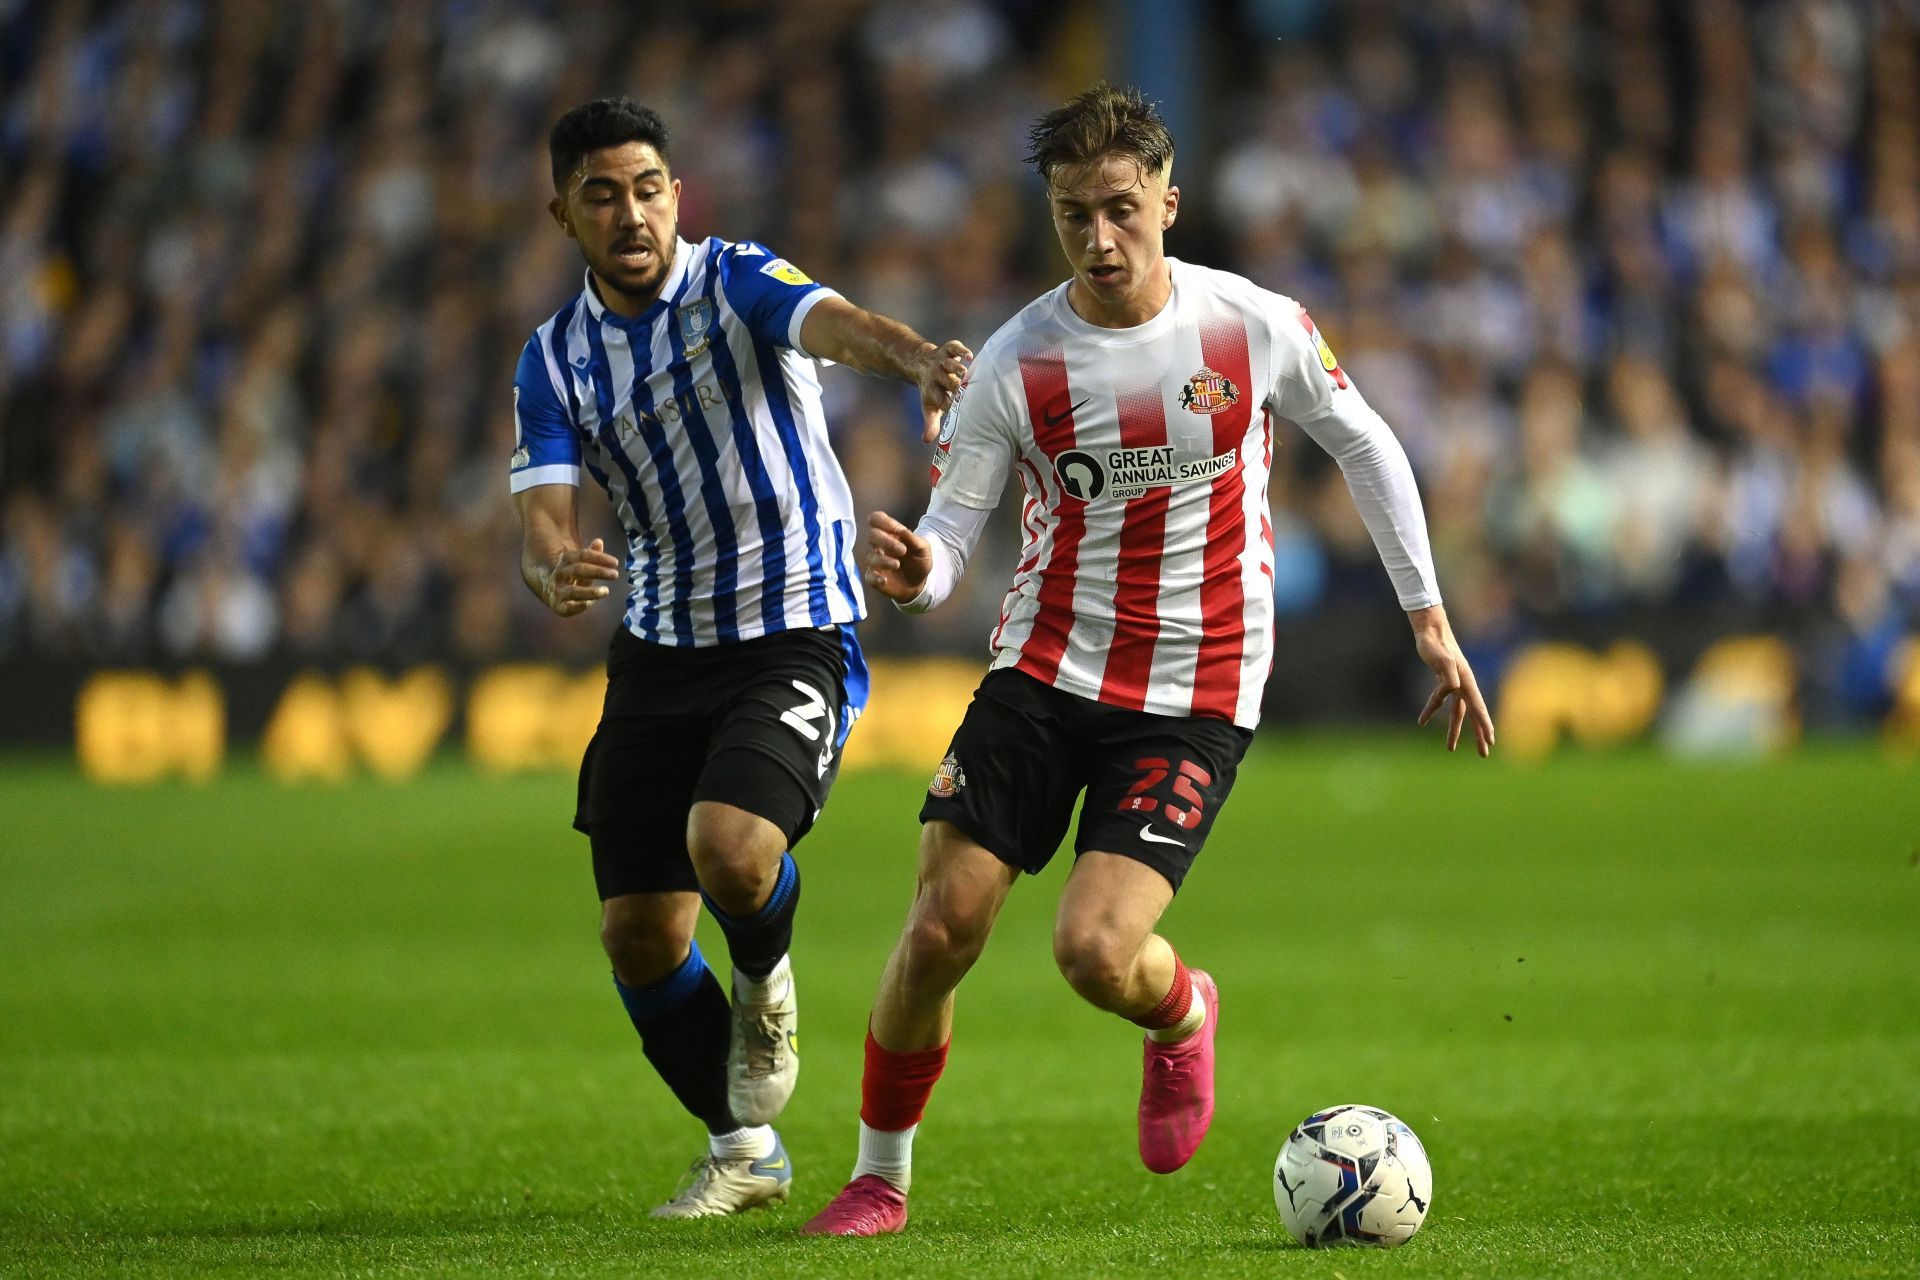 Sunderland and Wycombe Wanderers square off on Saturday